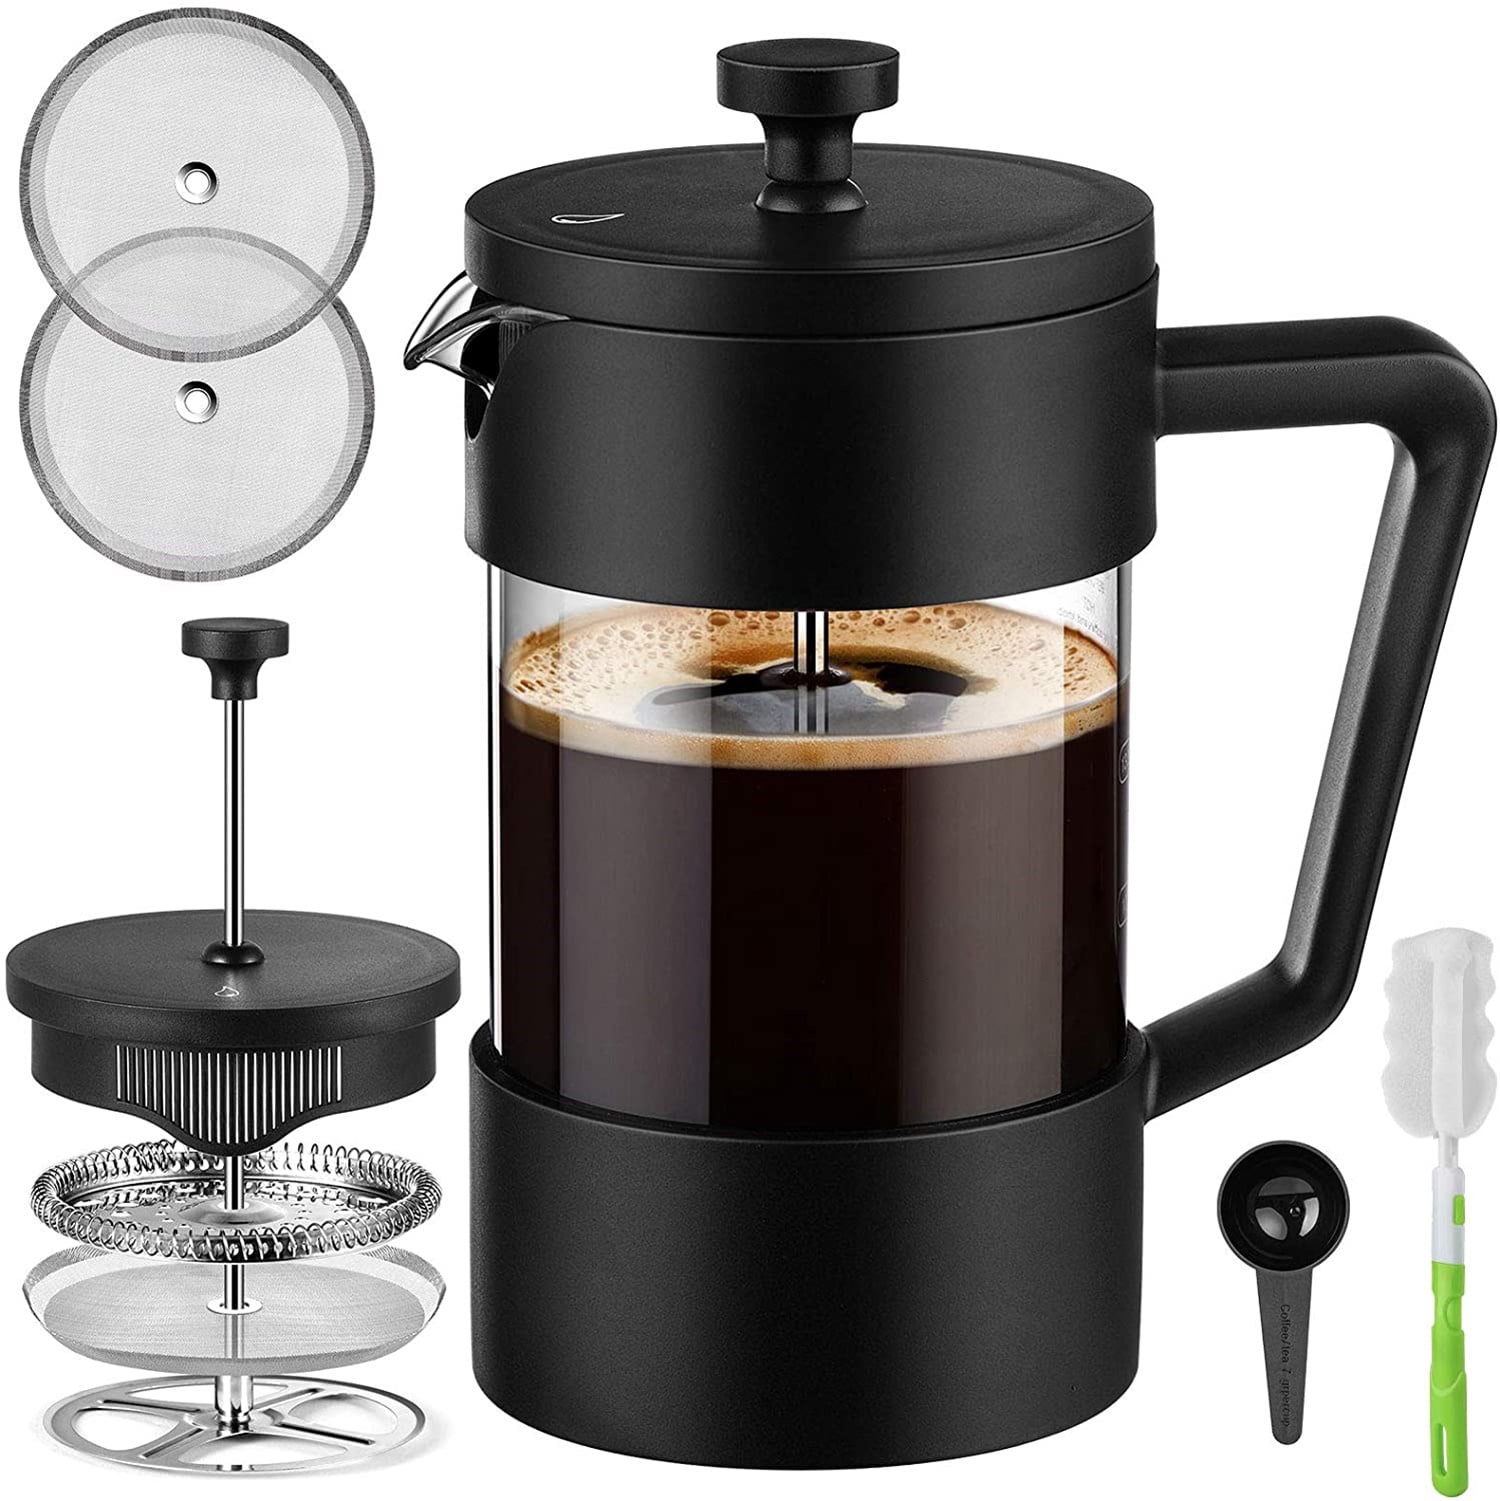  Utopia Kitchen French Press Coffee Maker, Espresso Tea and  Coffee Maker with Triple Filters 34 Ounce, Stainless Steel Plunger and Heat  Resistant Borosilicate Glass - Black: Home & Kitchen